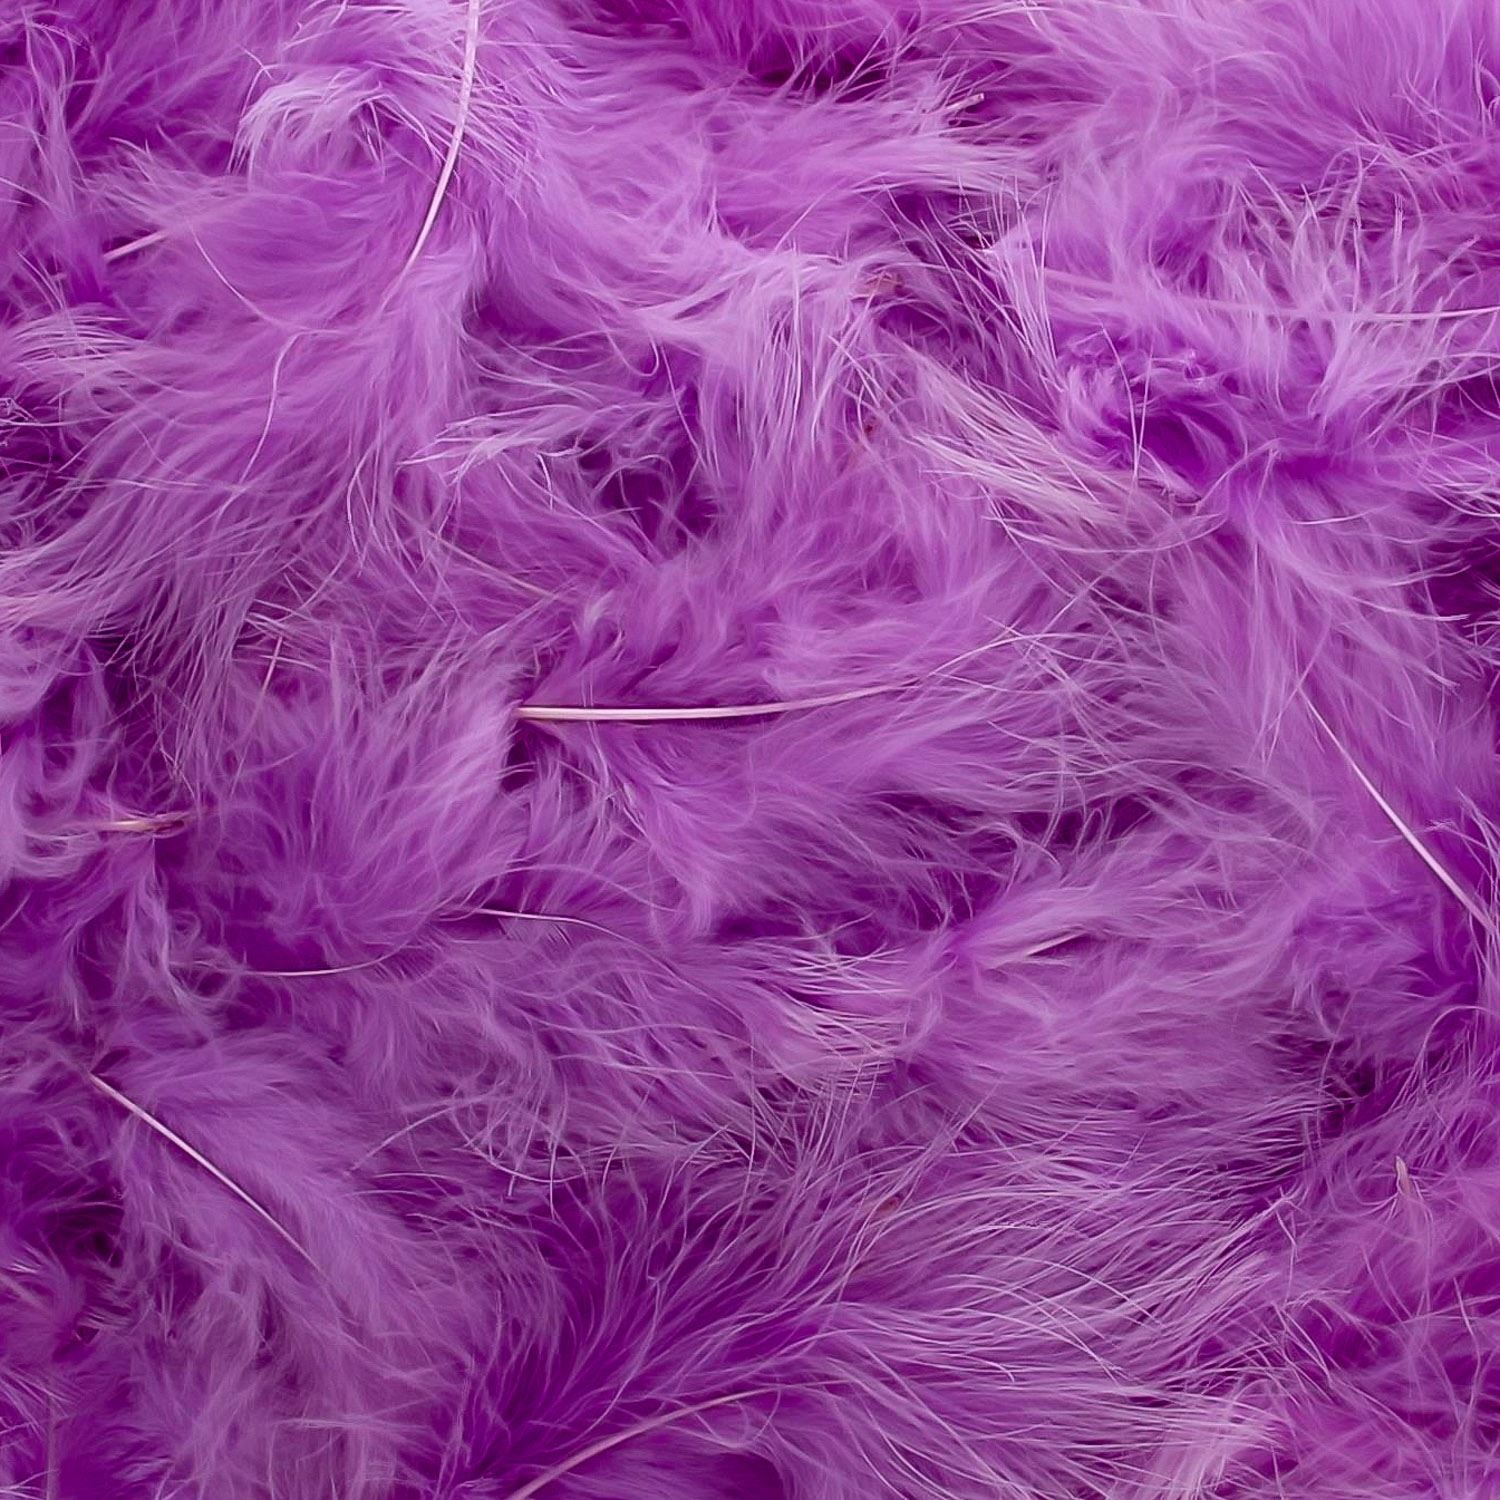 Feathers Lilac - about 400 pieces per bag